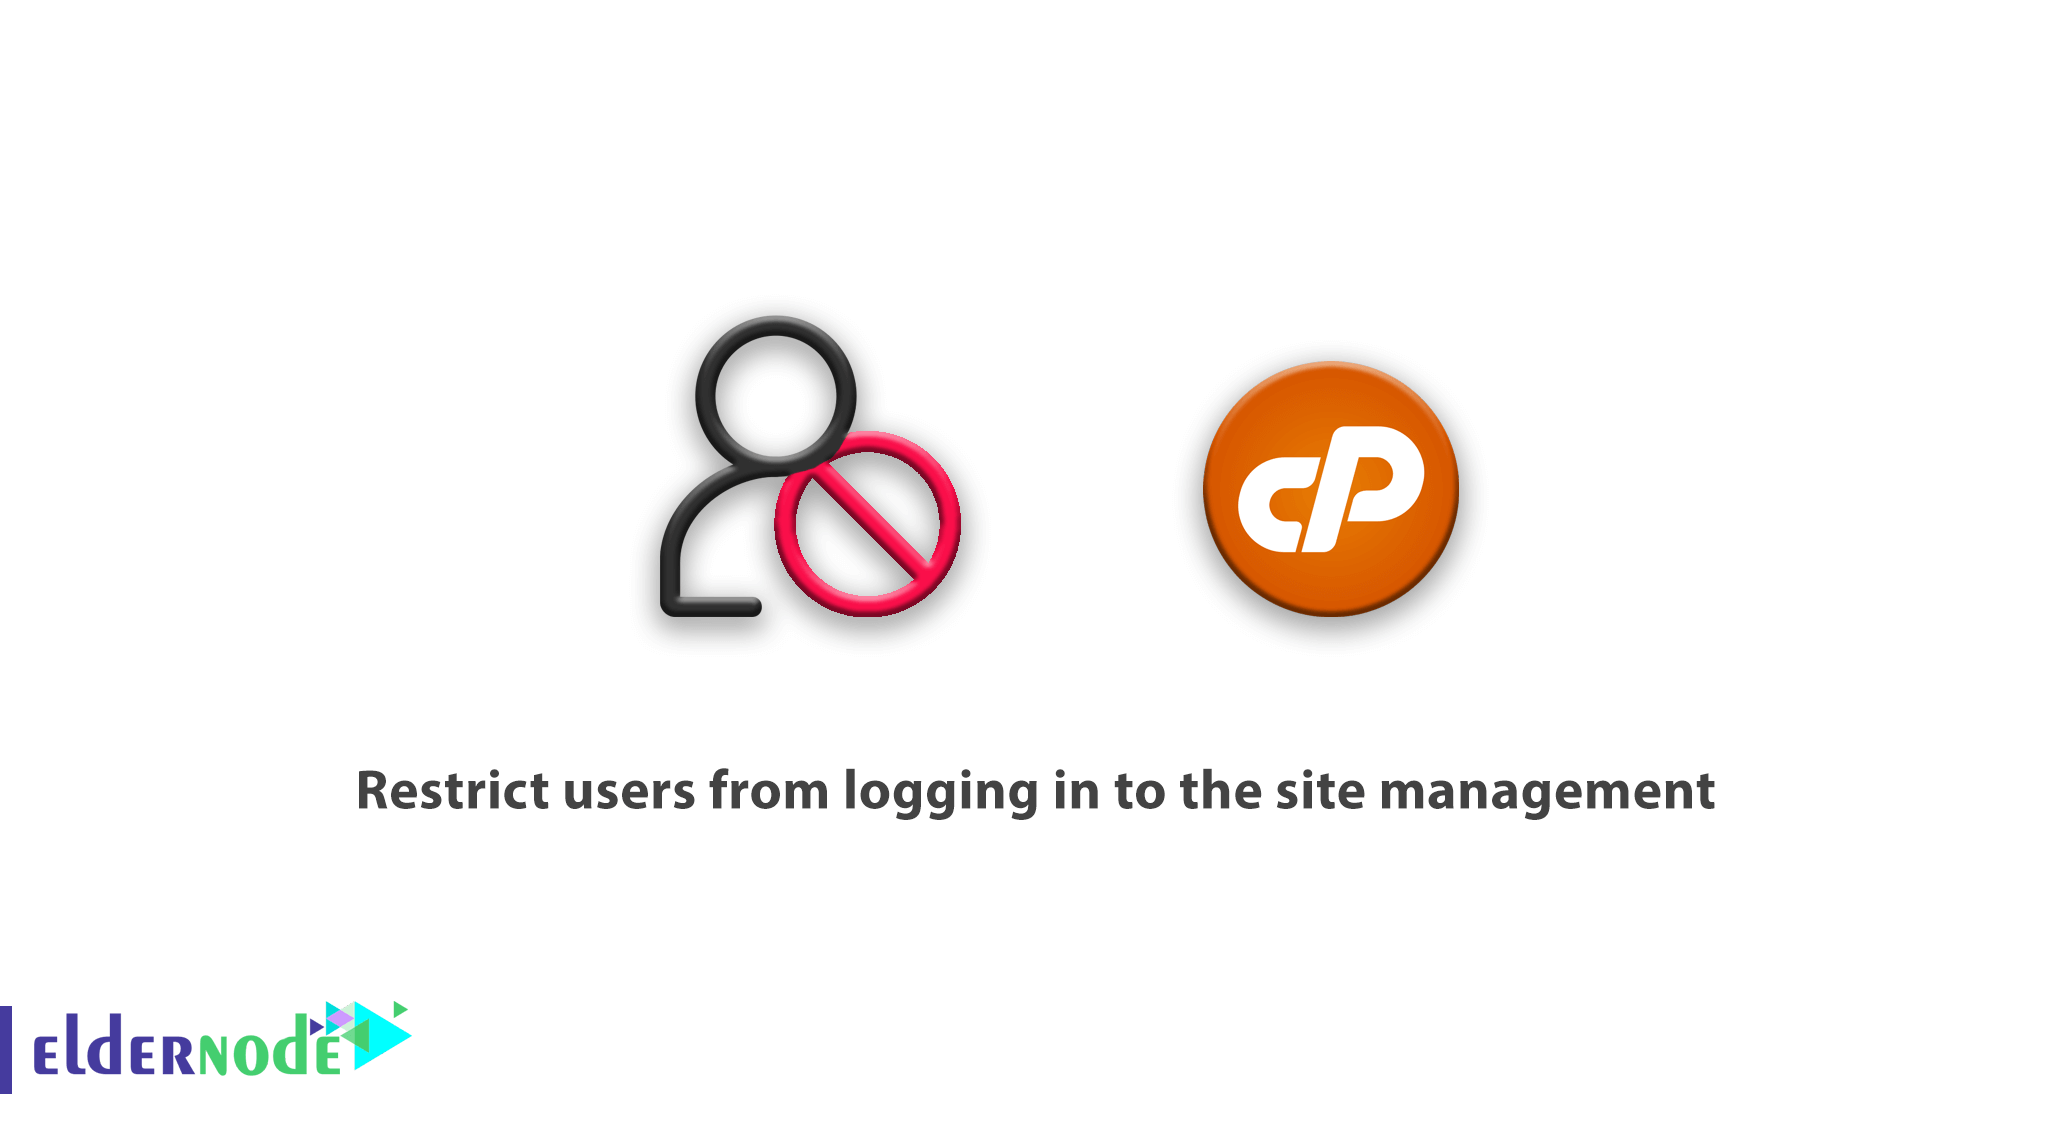 How to restrict users from logging in to the site management